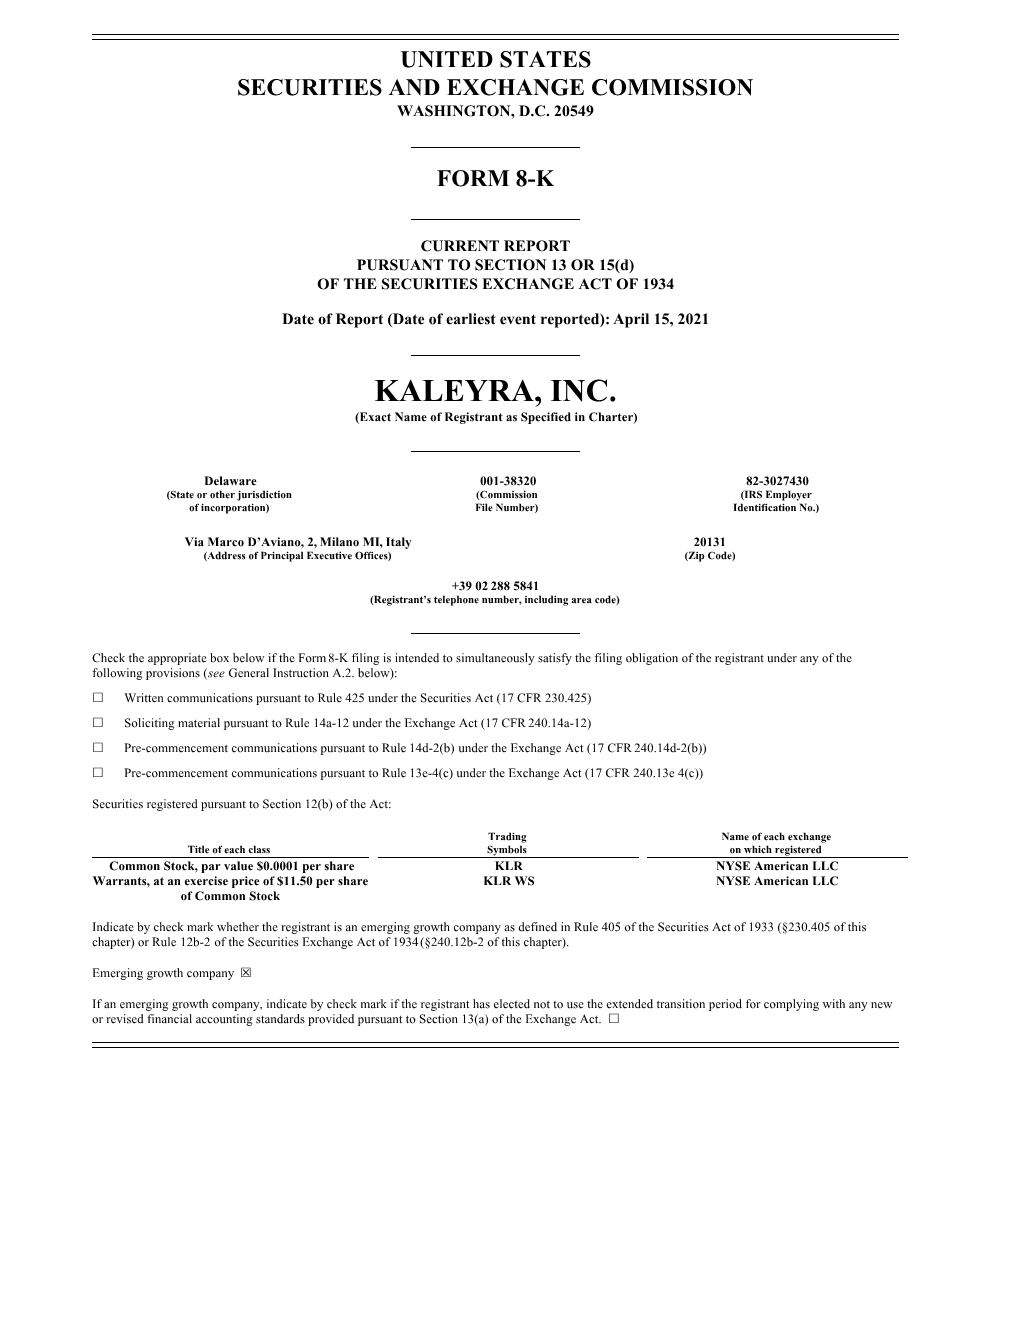 KALEYRA, INC. (Exact Name of Registrant As Specified in Charter)